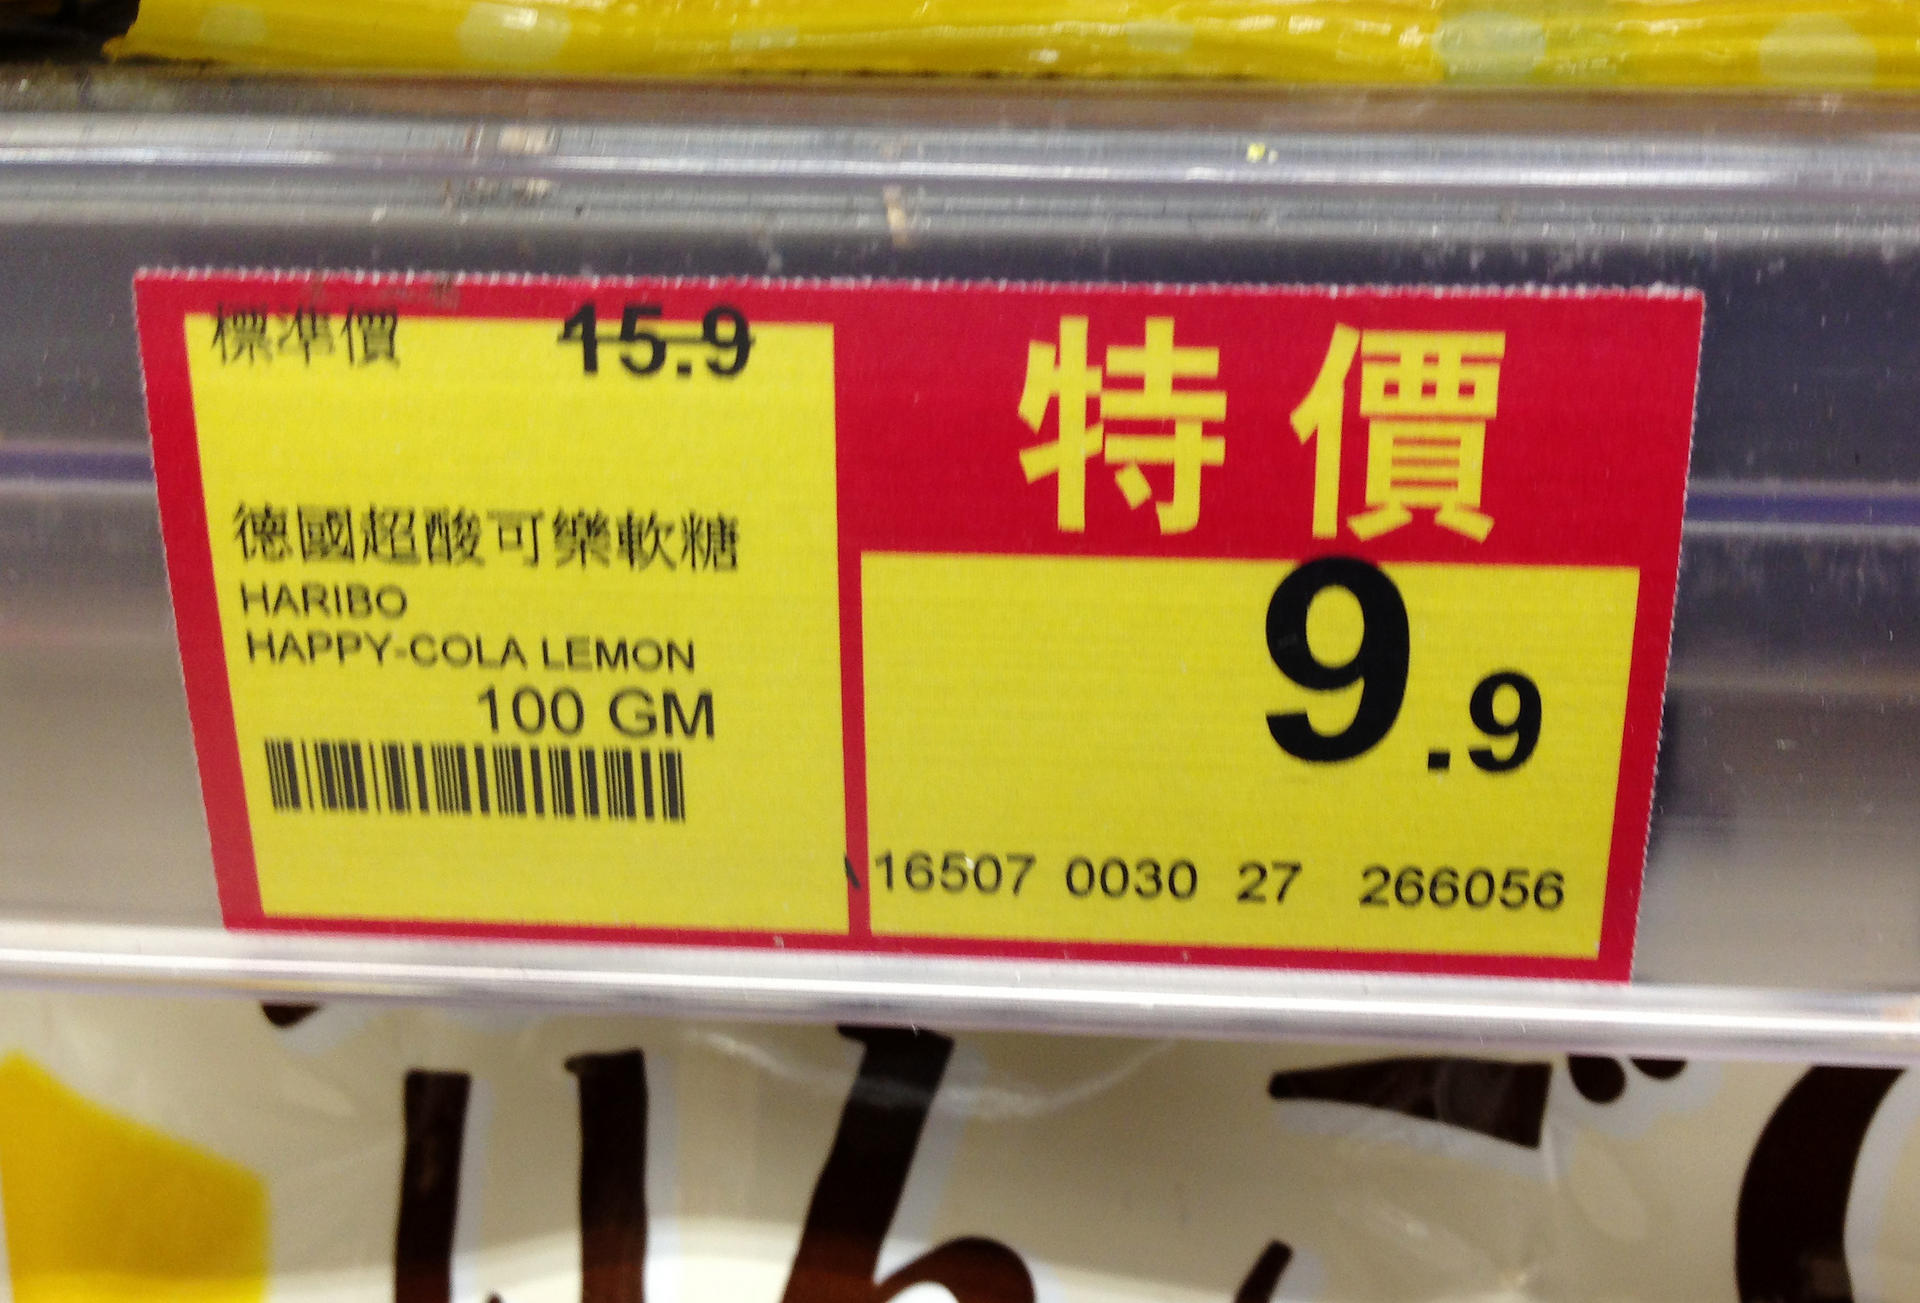 Terms on Wellcome price tags have changed. Photo: Natalie Wai